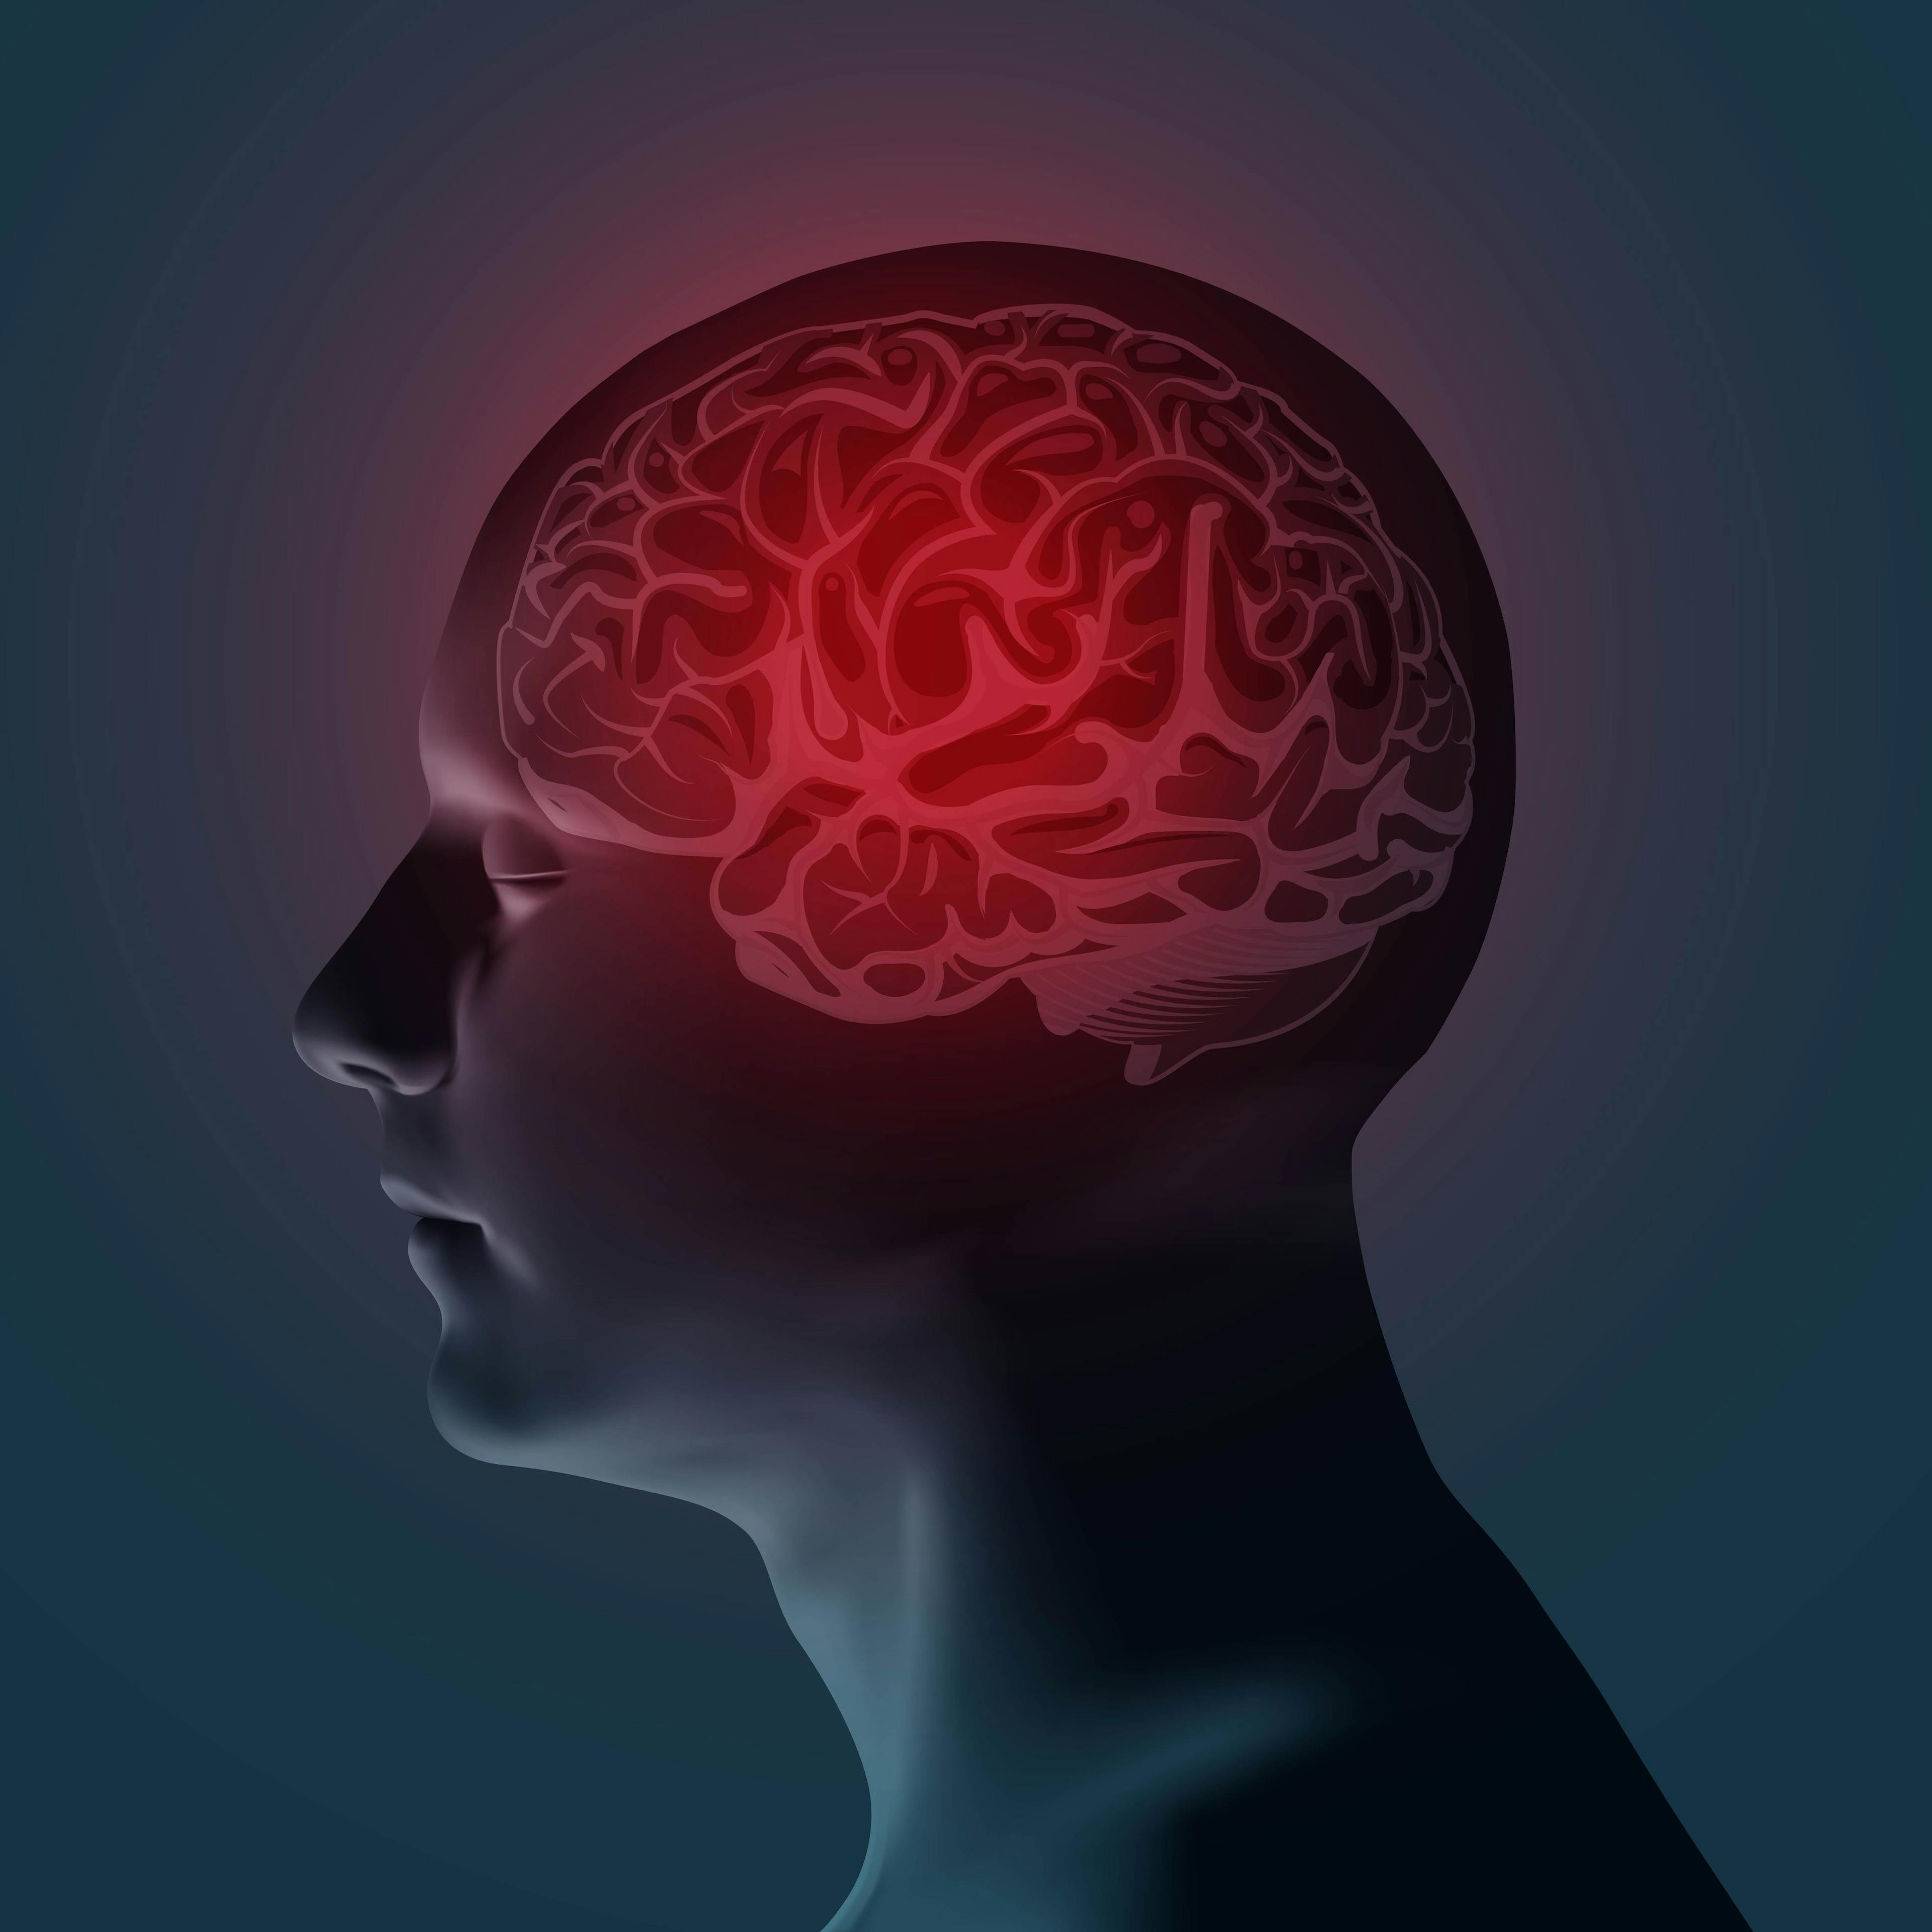 SPMS Drug Linked to Improved Cognition Processing Speed, Study Says